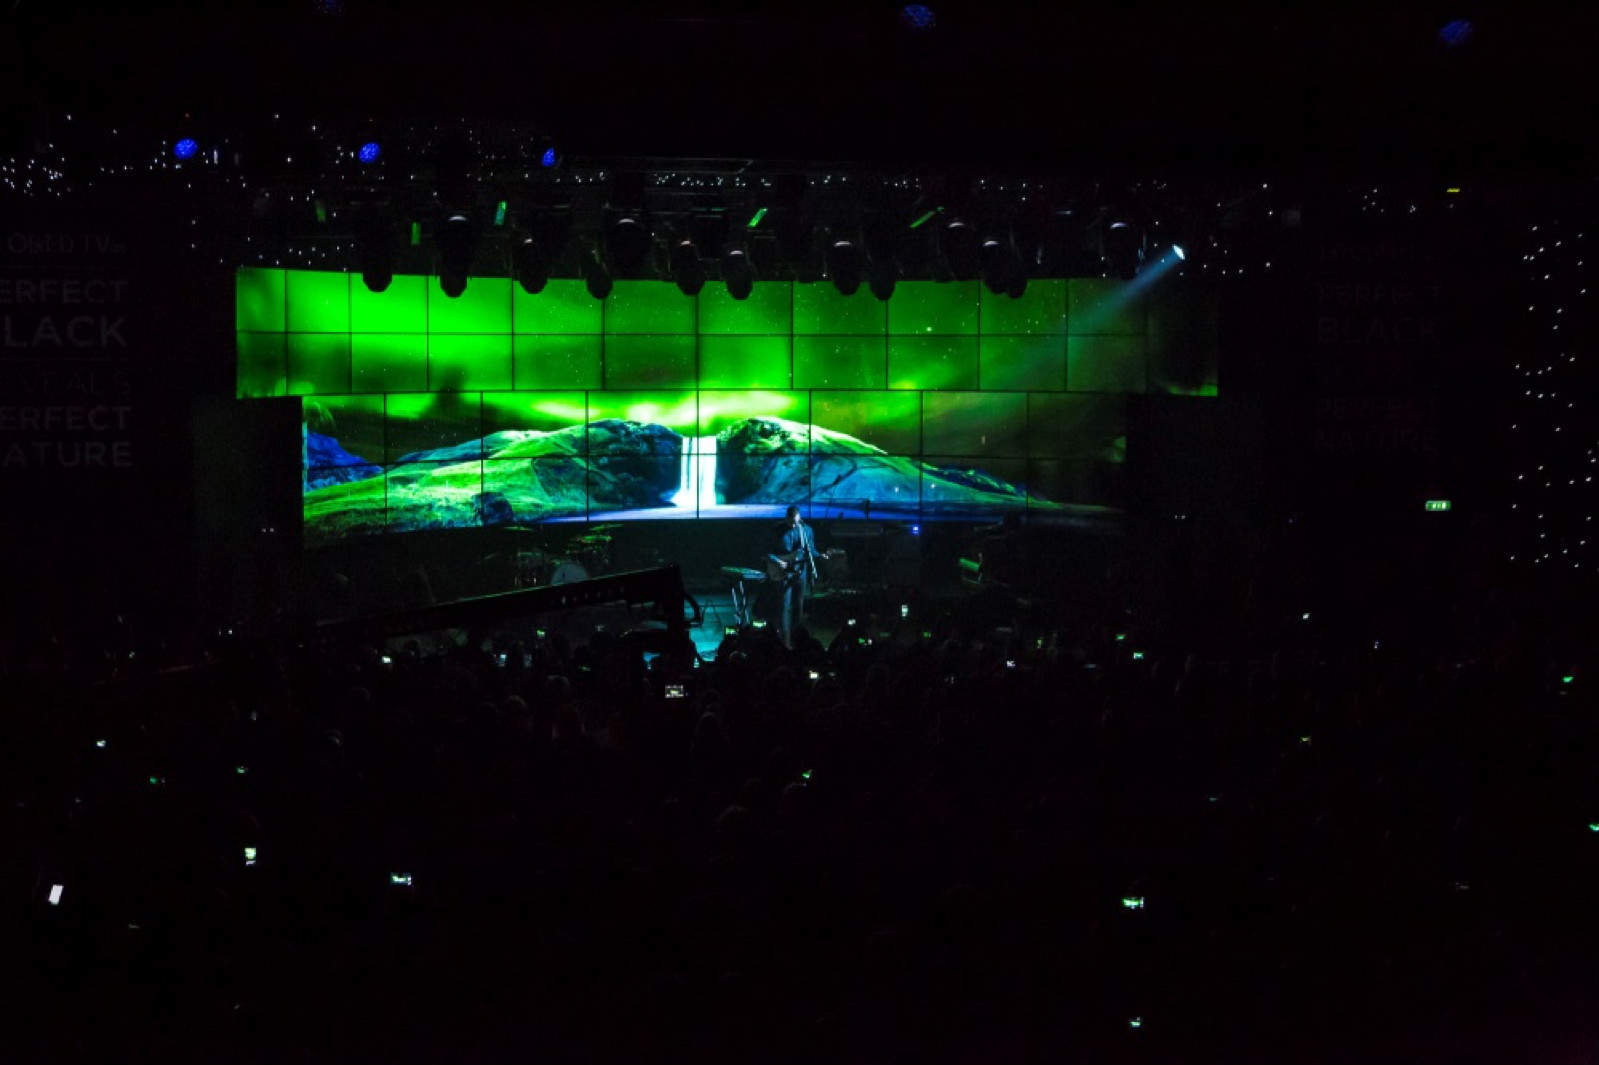 The beauty of the aurora borealis, as seen on a giant wall of screens.